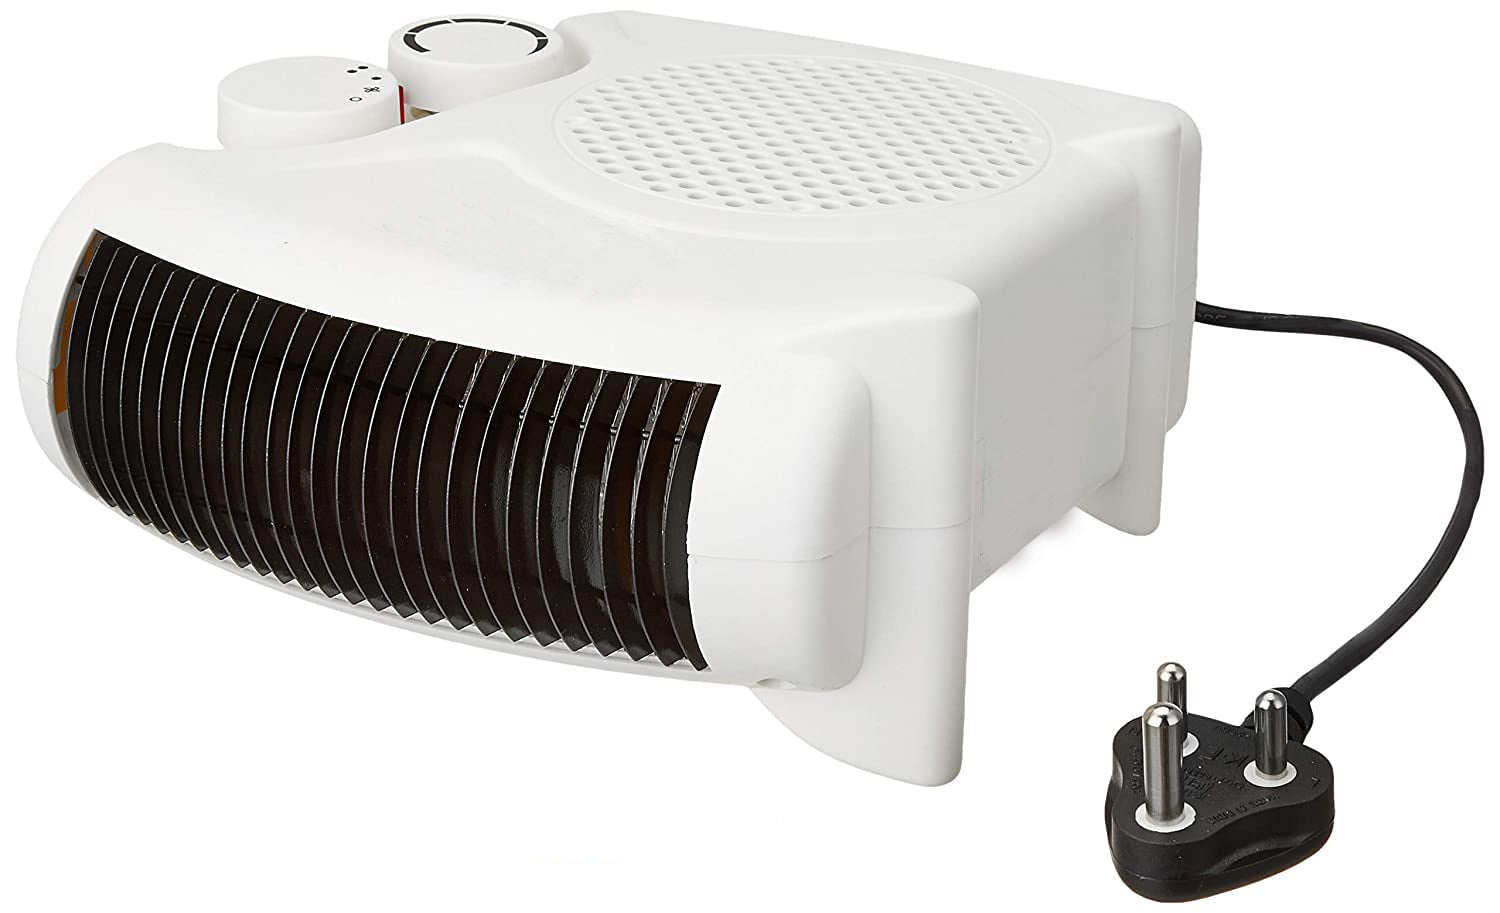 Fintronic Electric Heater for Room with Overheating Protecti